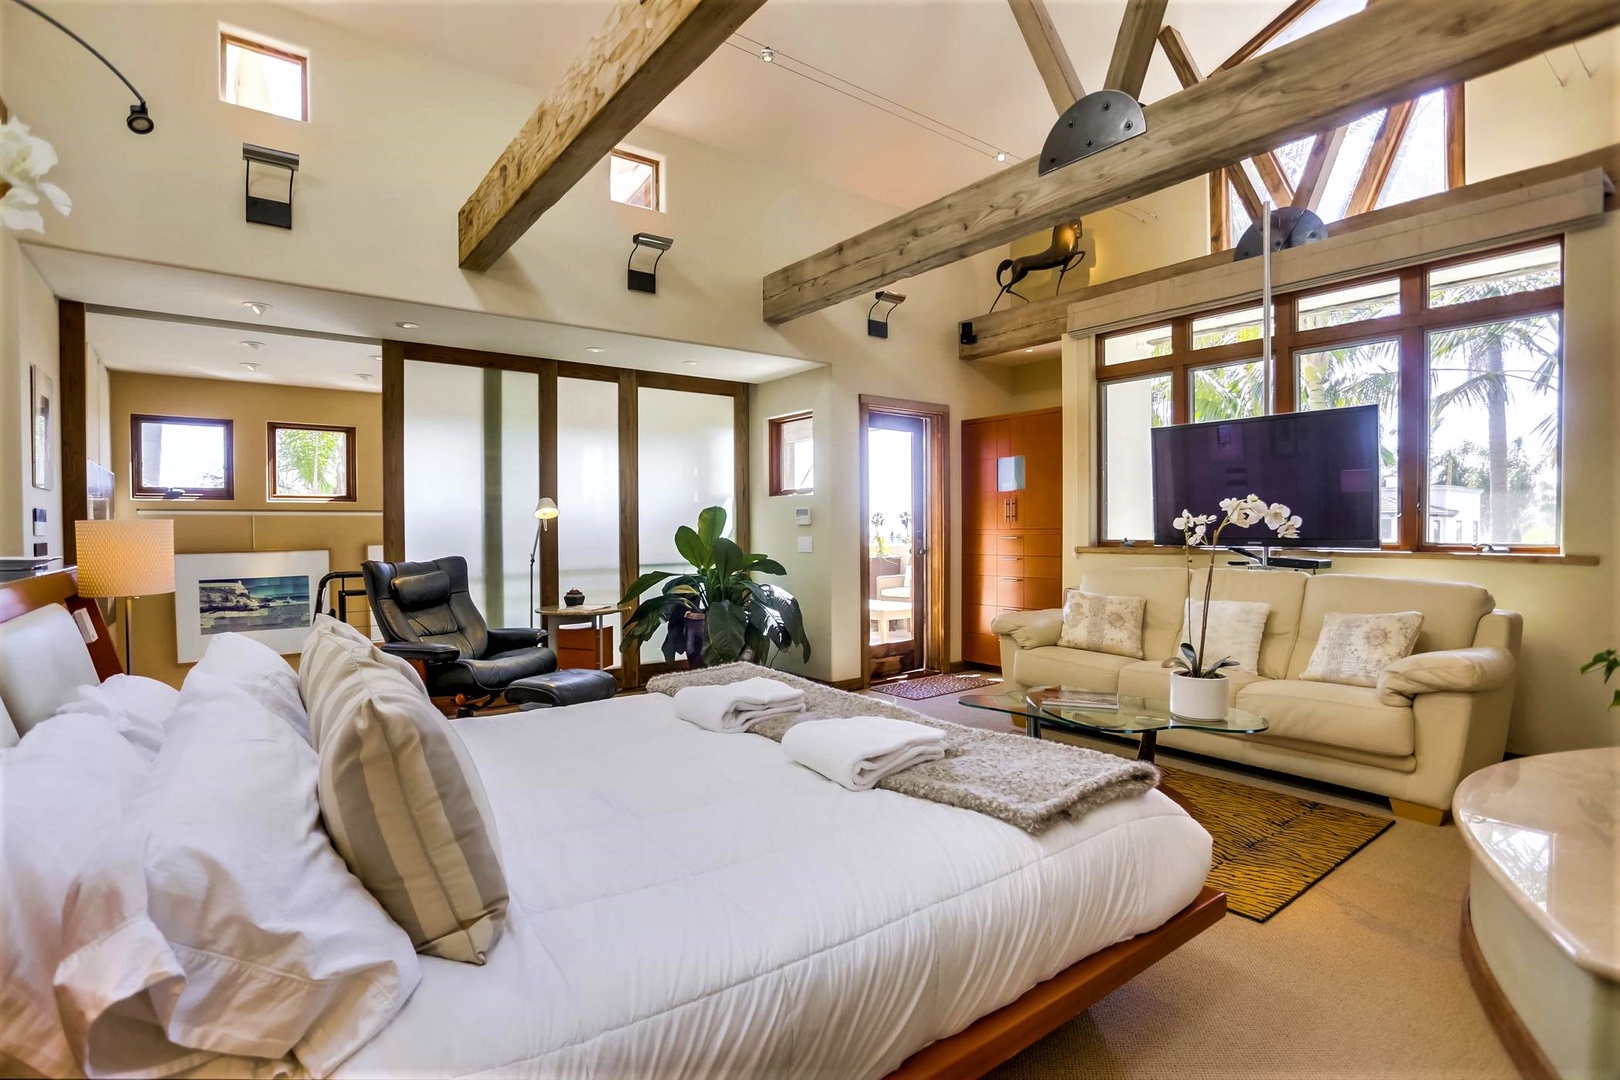 Master suite with vaulted ceilings